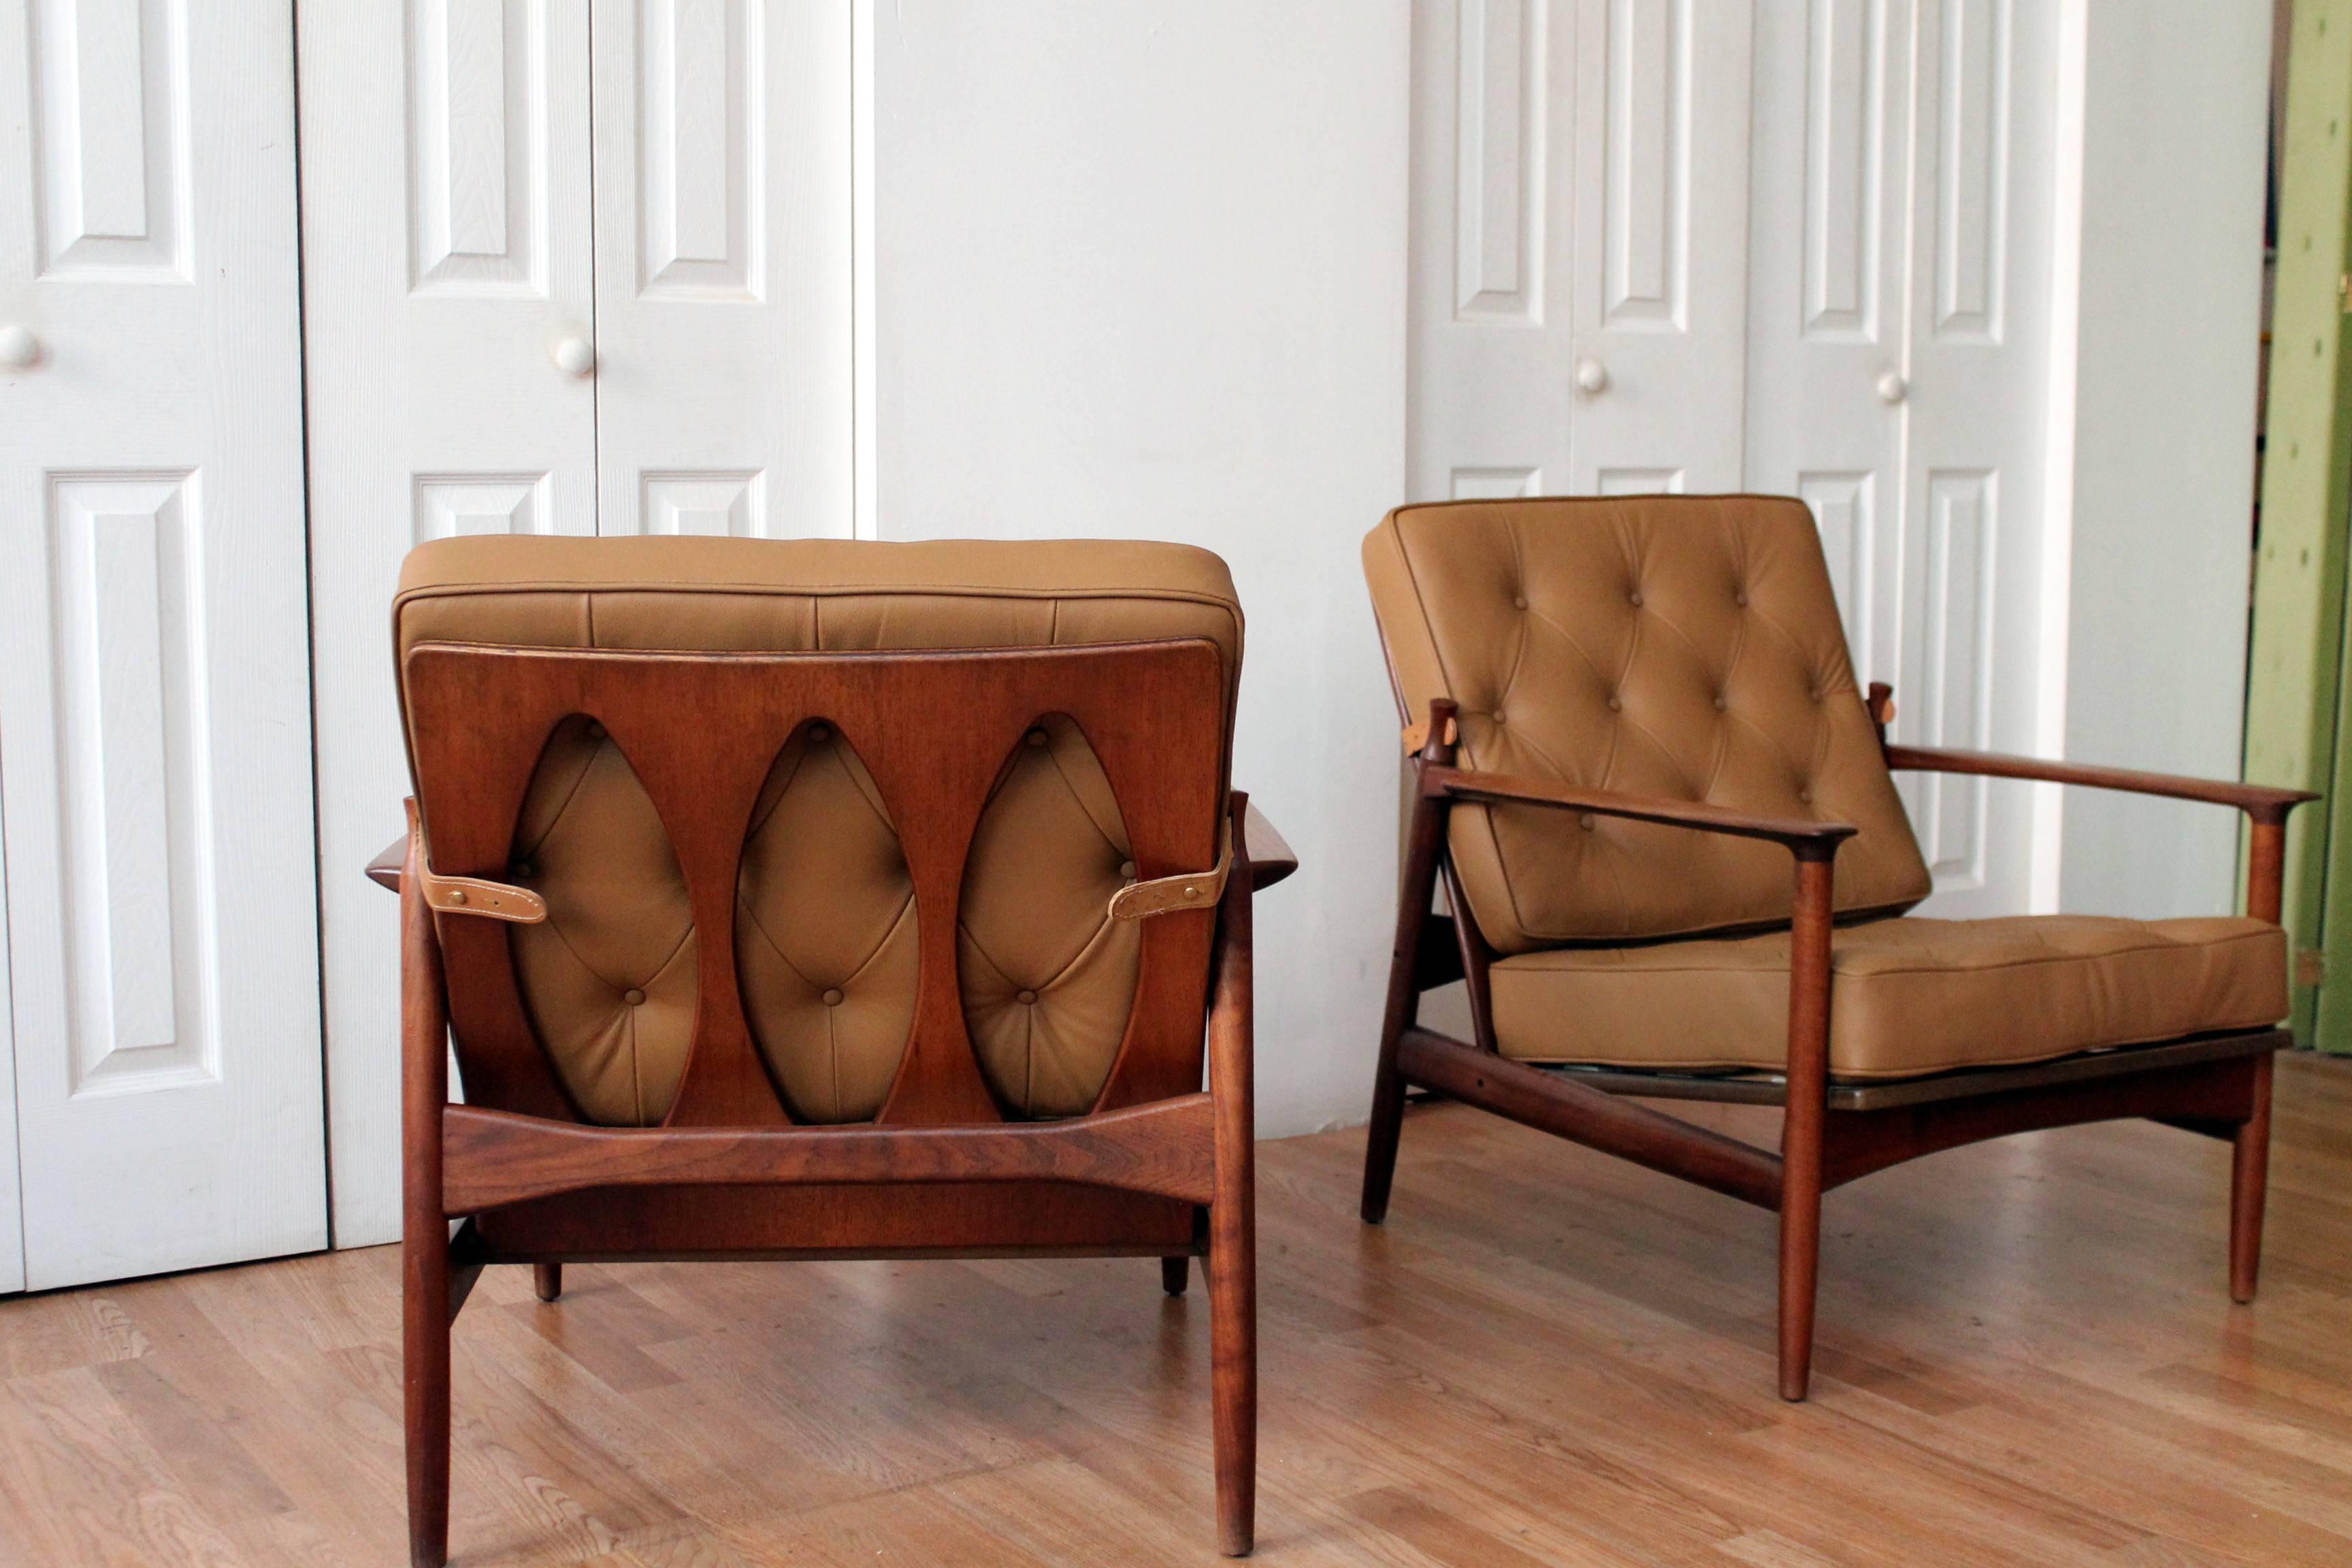 Mid-20th Century Rare Kofod Larsen Selig Solid Walnut Leather Lounge Chairs